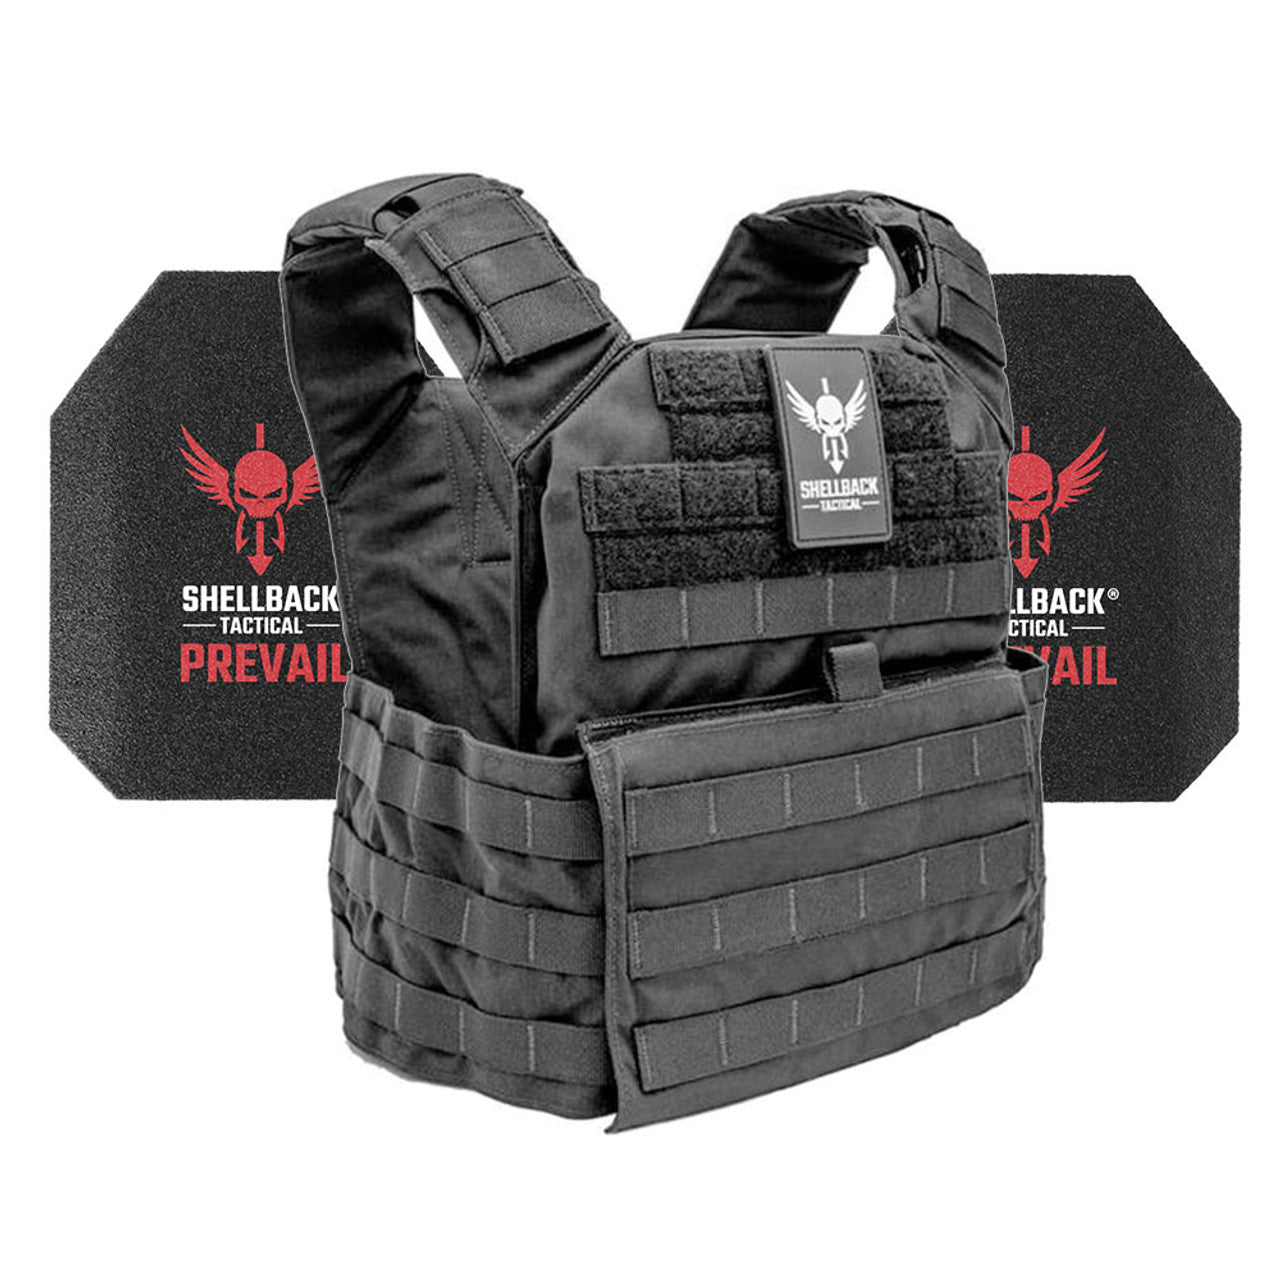 A black vest with a Shellback Tactical Banshee Rifle Level III Armor Kit with AR1000 Steel Plates from Pivotal Body Armor on it.